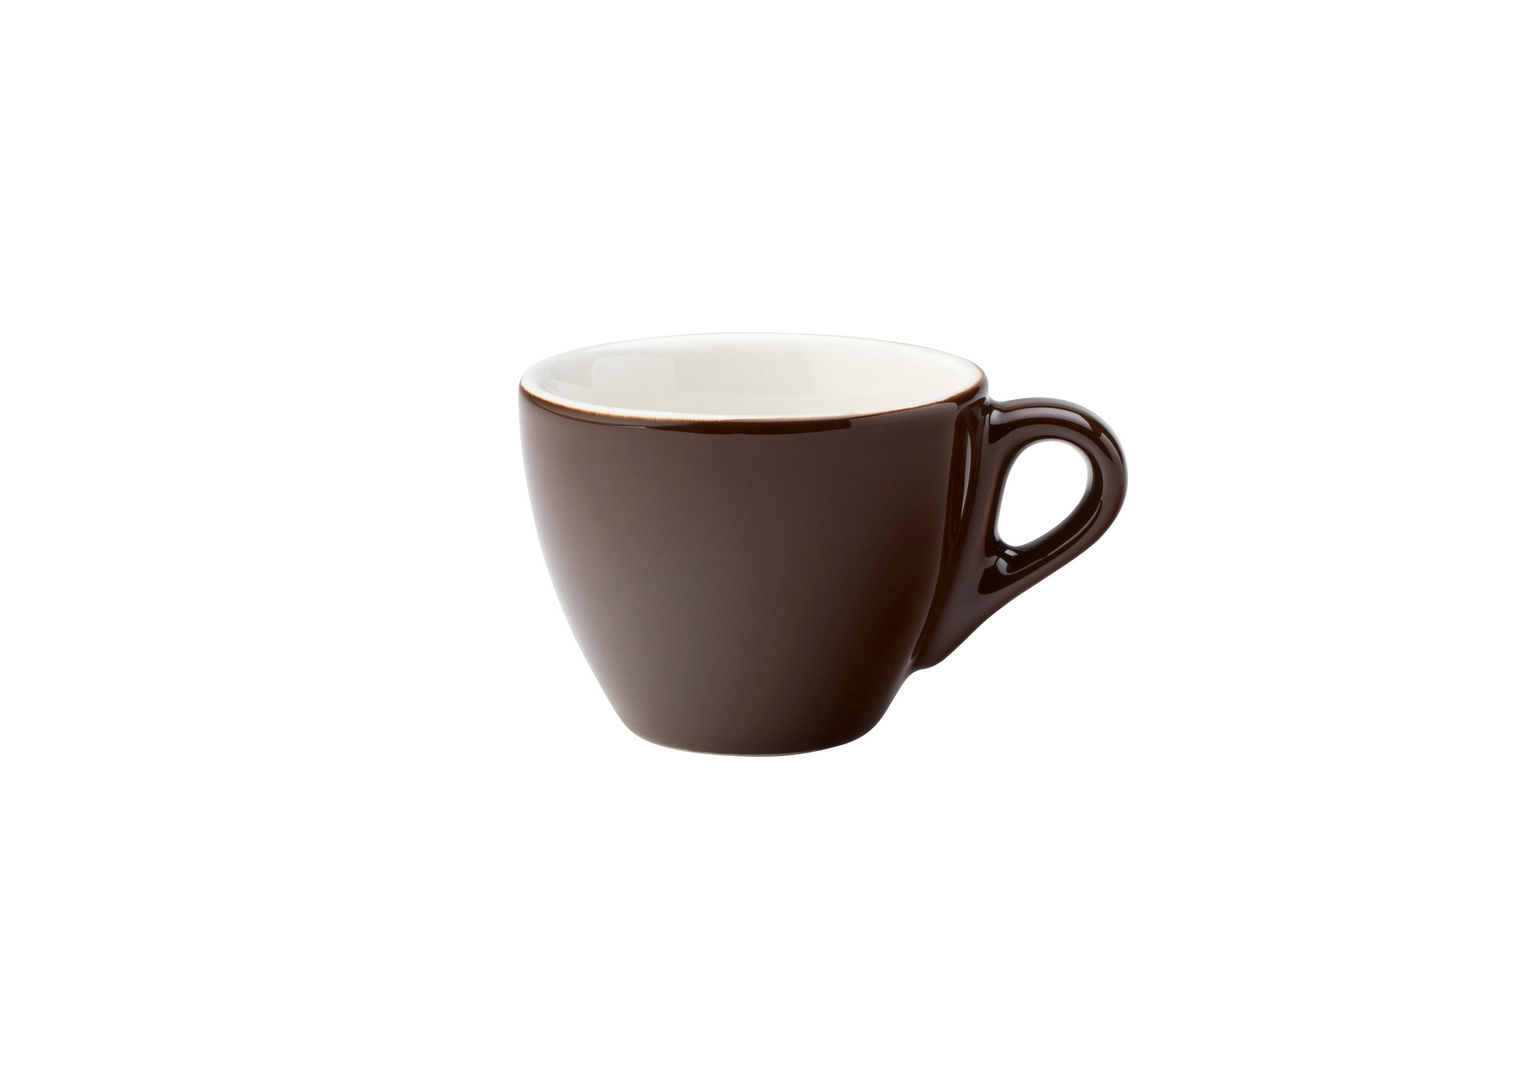 Barista Espresso Brown Cup 2.75oz (8cl) - CT8131-000000-B01012 (Pack of 12)